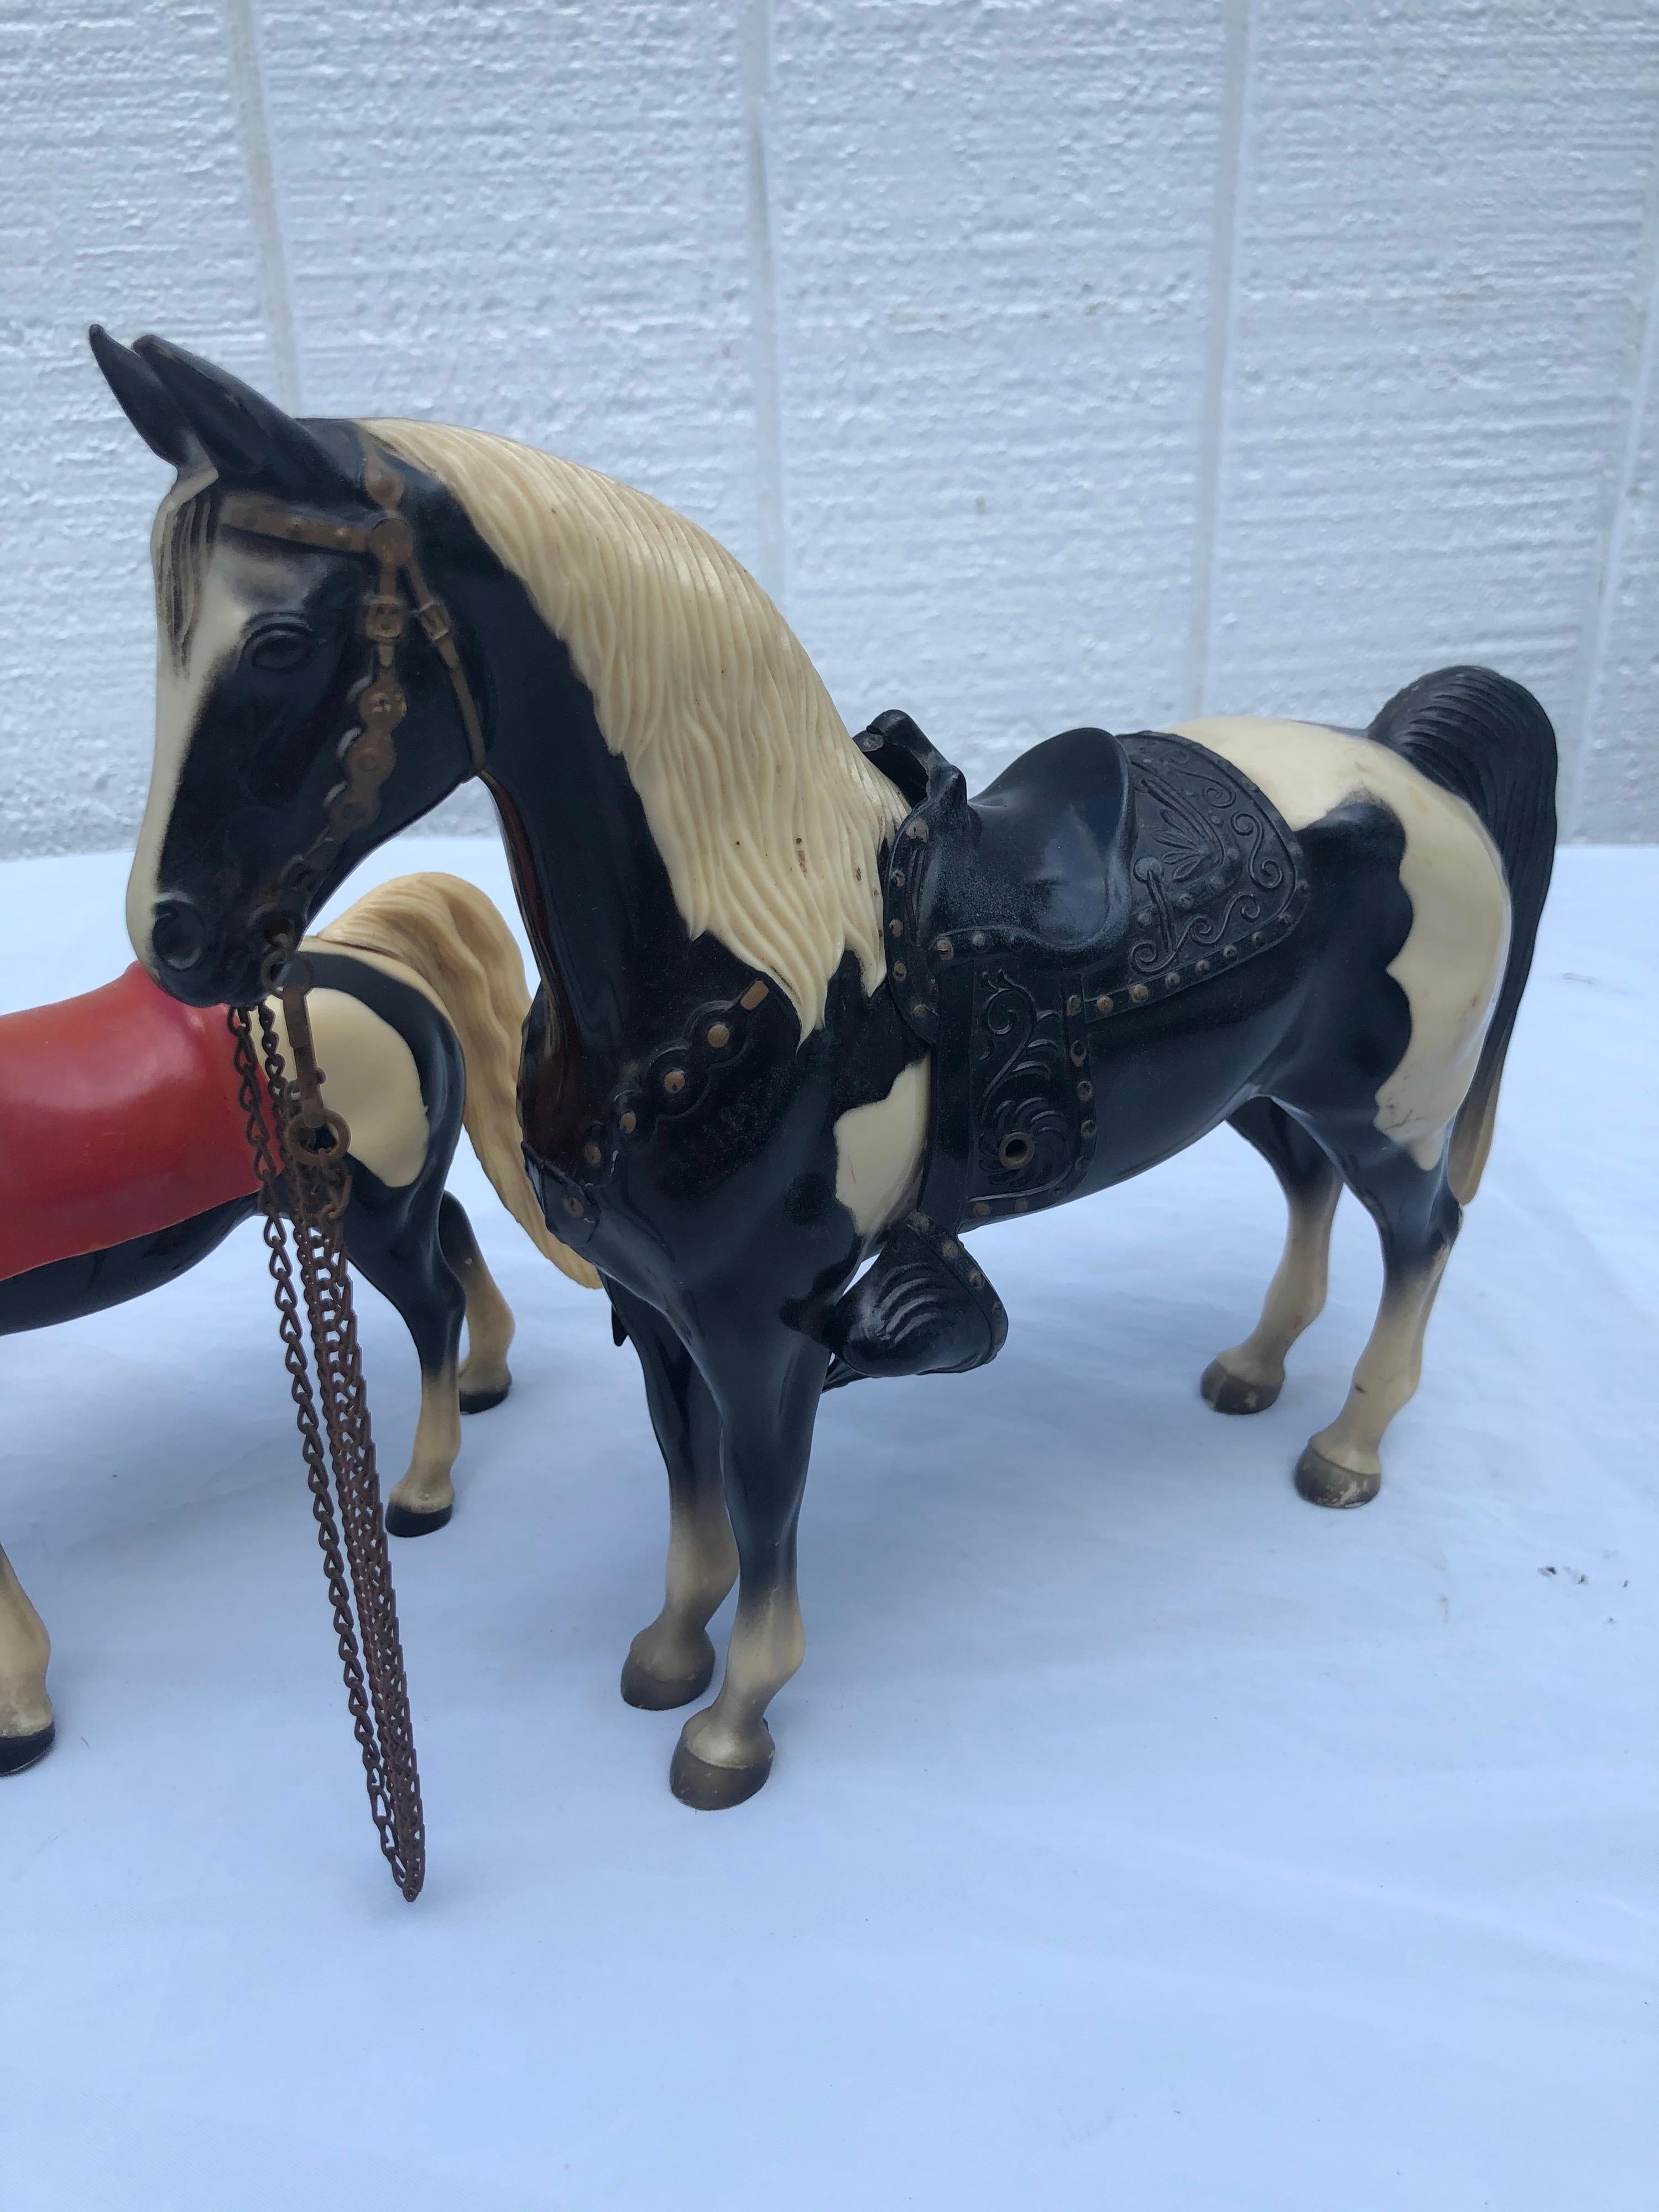 90s horse toys